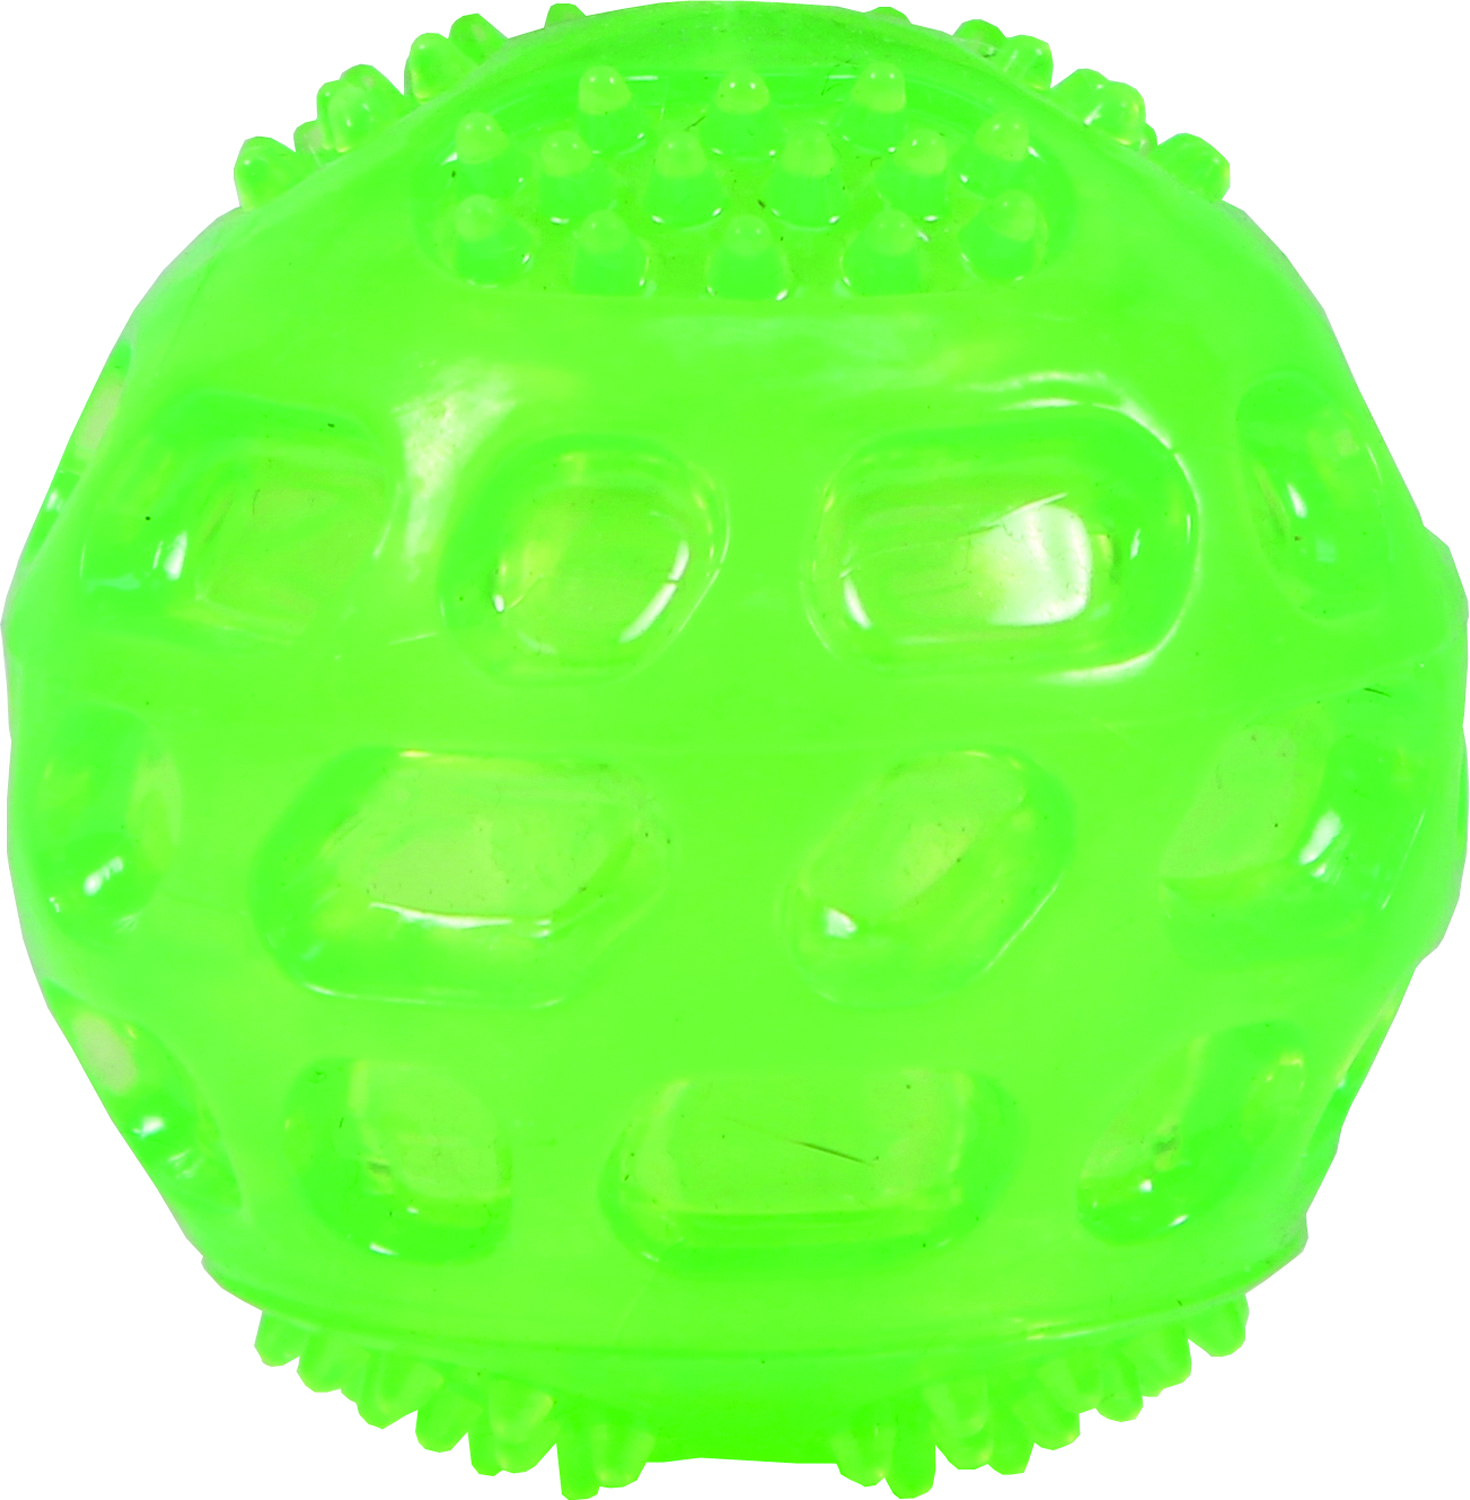 DURA-SQUEAKS BALL DOG TOY